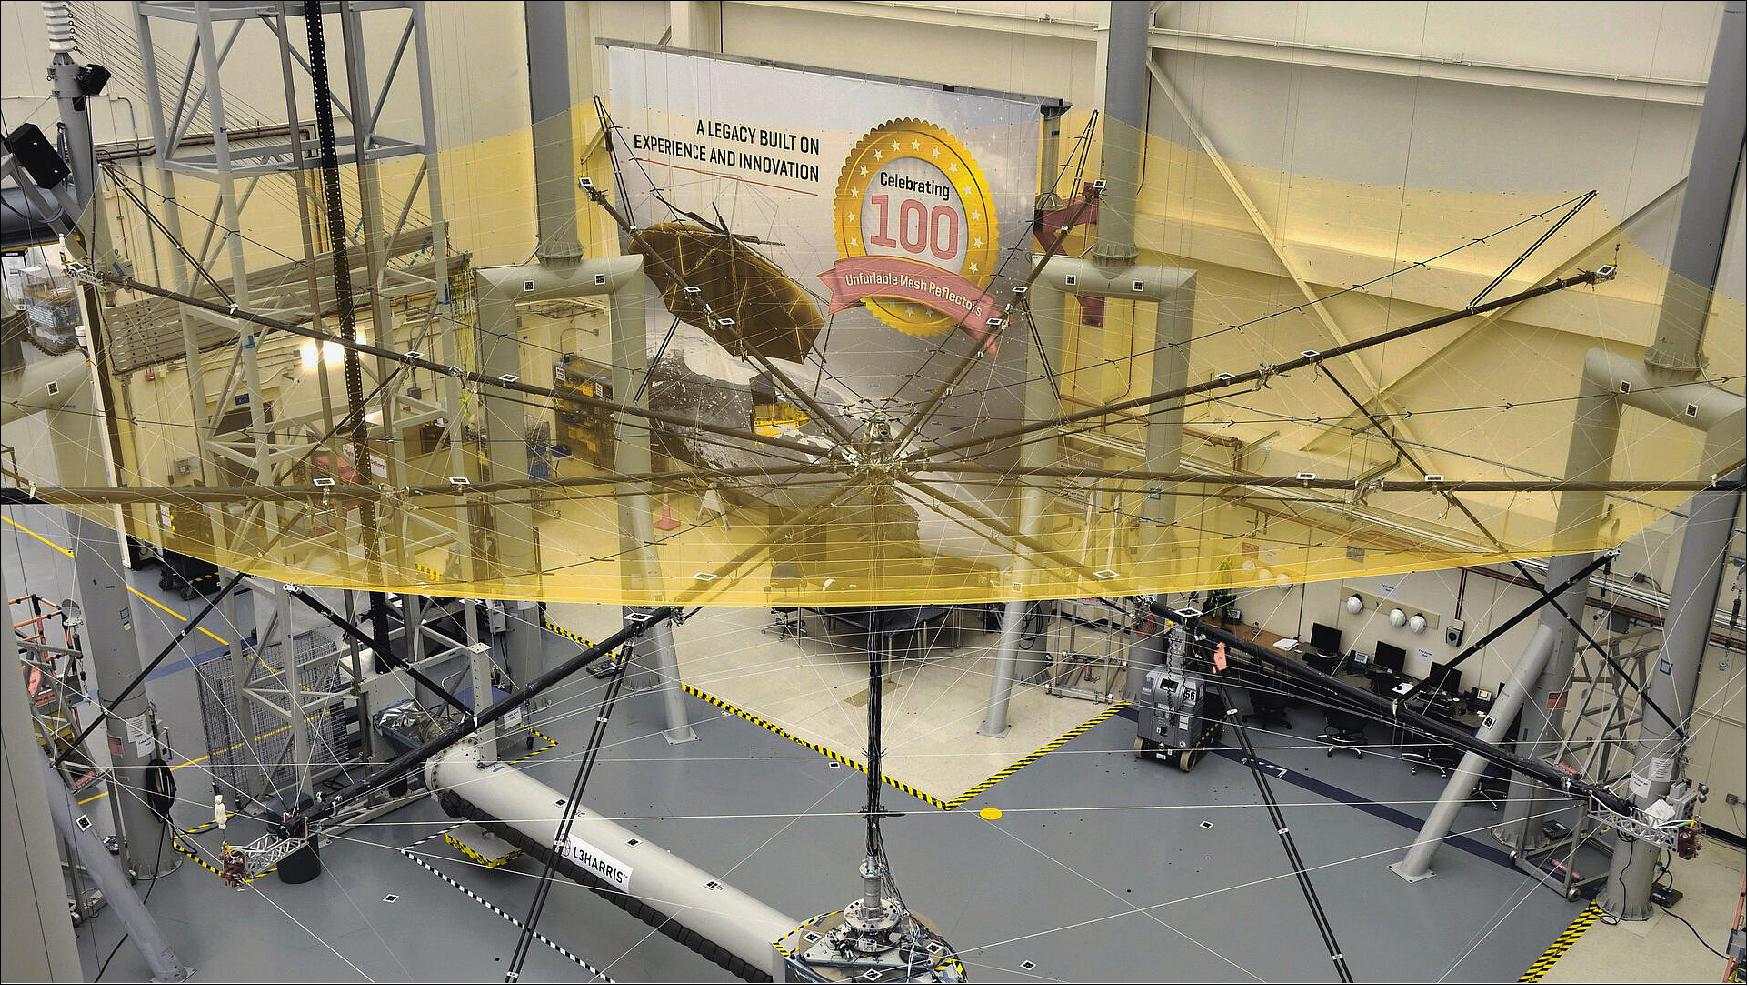 Figure 15: With liftoff scheduled for 2023, engineers are busy building and testing ESA’s Biomass satellite. The photo shows the satellite’s 12-meter reflector in the cleanroom at L3Harris Technologies in Florida, USA, where engineers tested its deployment procedure. The satellite will be launched with this huge antenna folded up, and once safely in orbit around Earth, a three-piece boom deploys the stowed reflector bundle into position. When the boom hinges lock into their final positions the reflector bundle is released and then opened to provide a highly accurate and stable 12-meter aperture wire-mesh reflector. This reflector will receive P-band data reflected from the world’s forests – data that will carry information about forest biomass and forest height, leading to a better understanding of the state of our forests, how they are changing over time, and advance our knowledge of the carbon cycle (image credit: L3Harris Technologies)